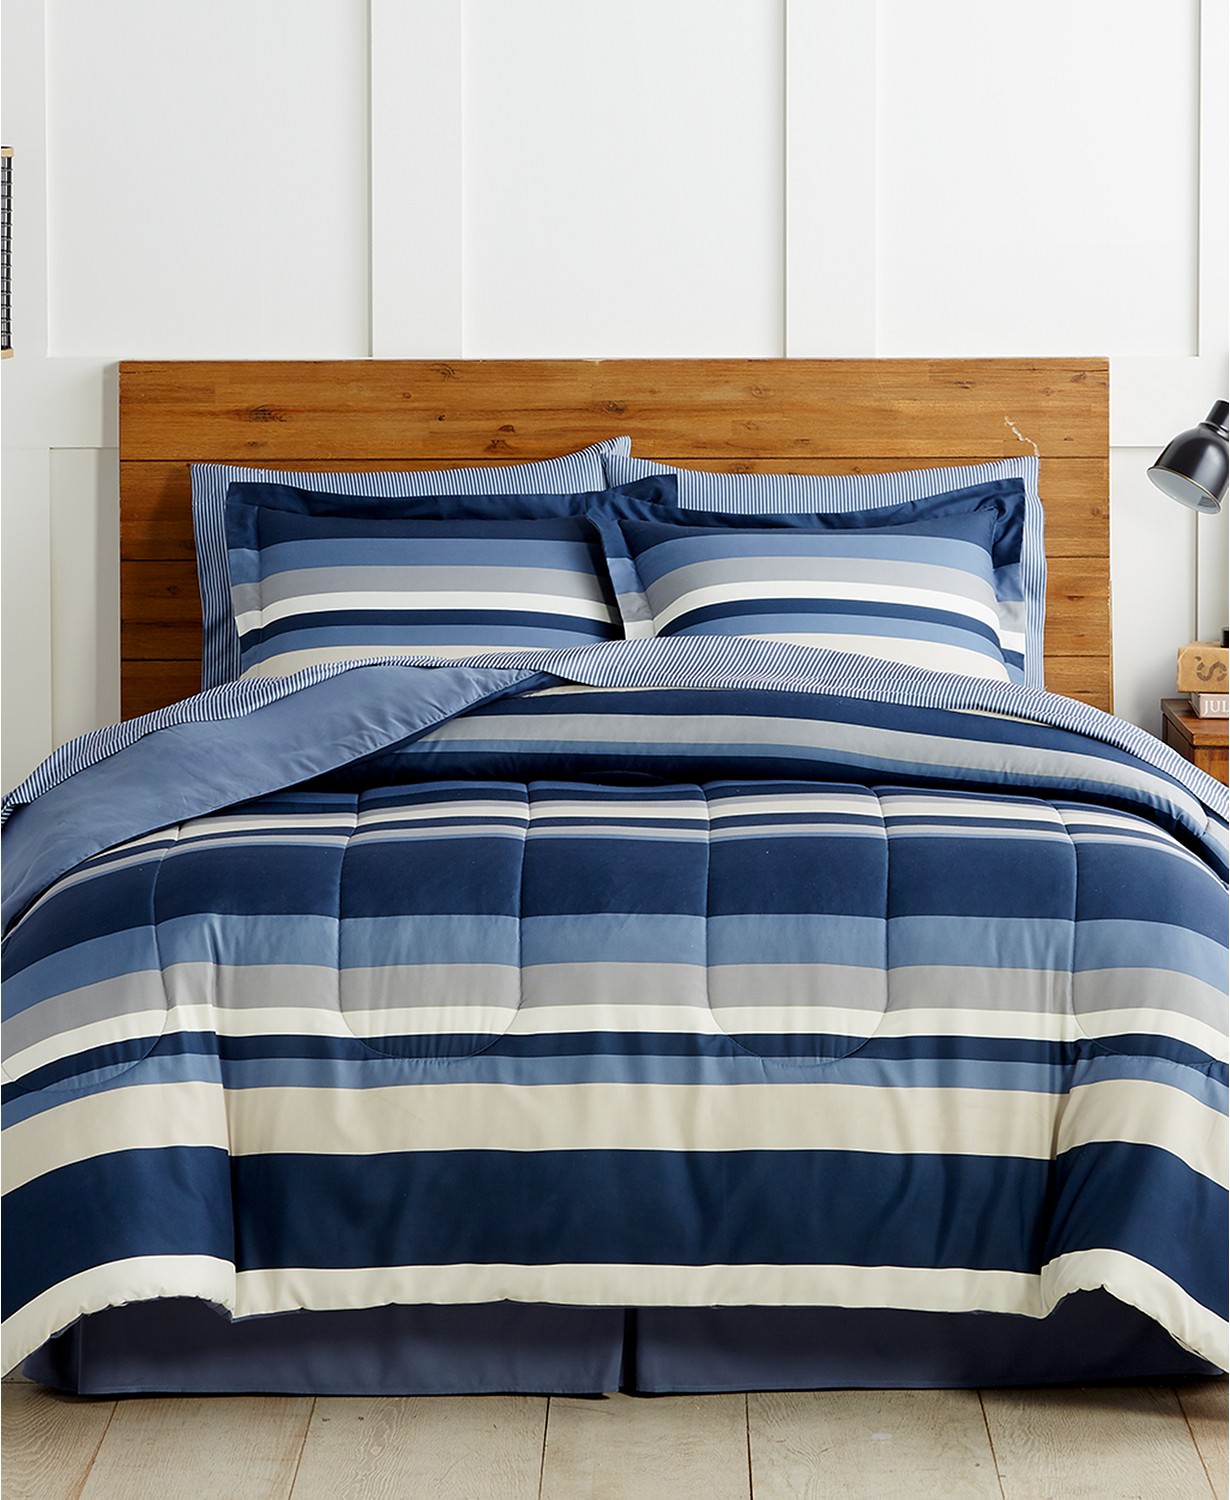 8-Piece Comforter Set (Various Sizes/Styles) $28 + free pickup at Macys or $3 shipping ...